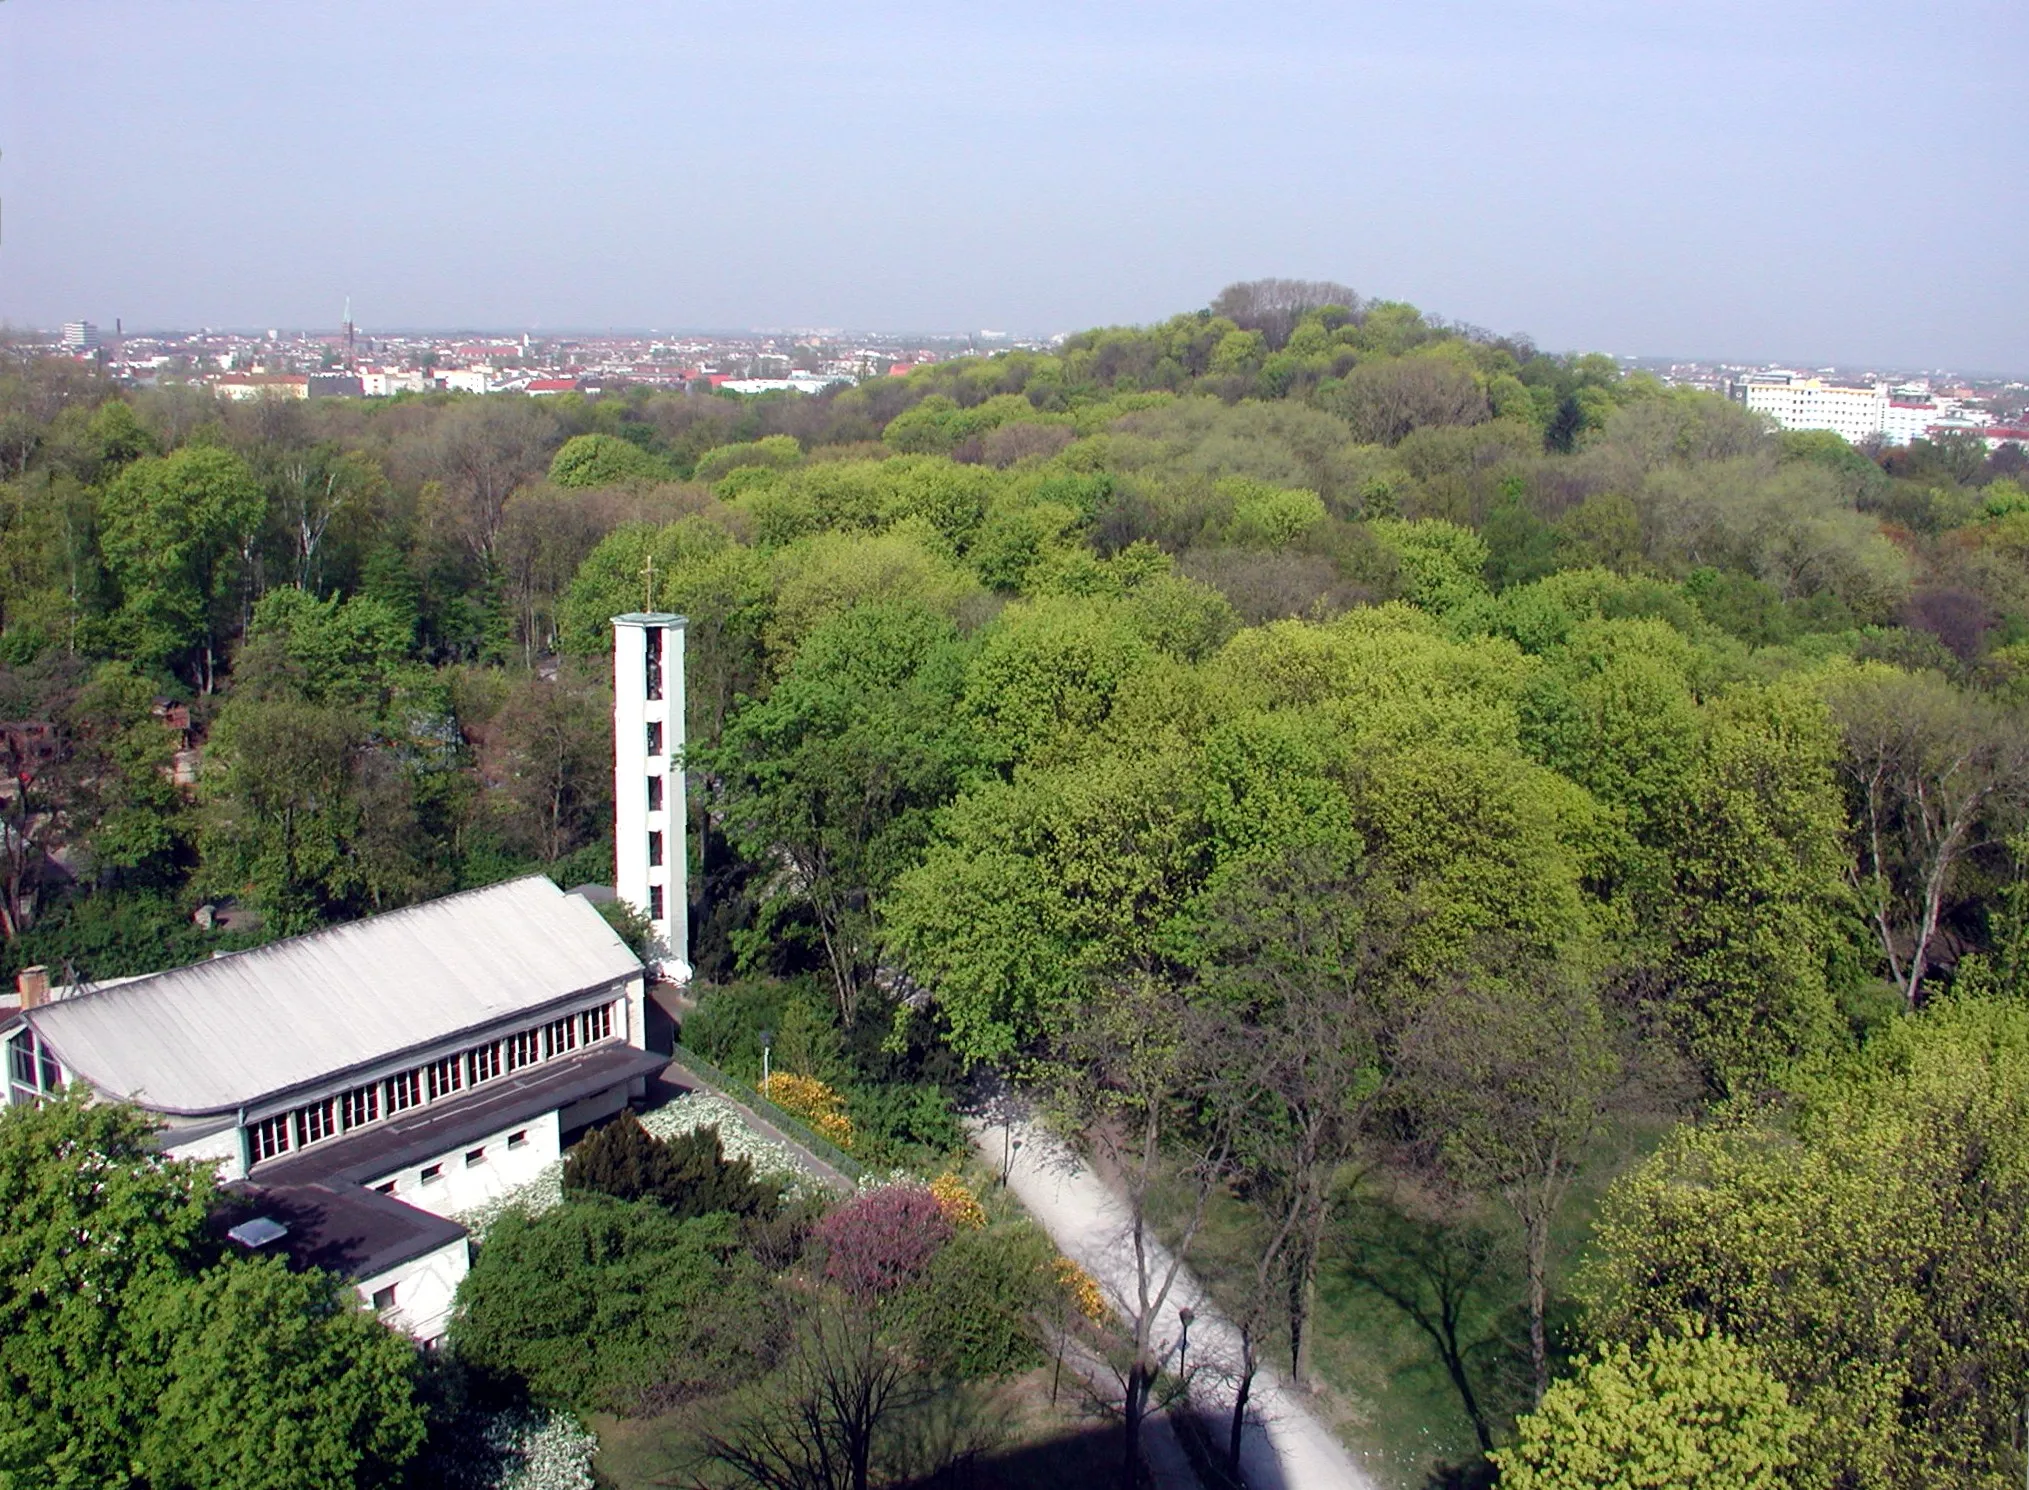 Photo showing: The Park of Humboldthain, with Humboldthöhe hight and the Ascension of Jesus Church, in Gesundbrunnen, Berlin, Germany. The Ascension Church is owned and used by a congregation within the Evangelical Church of Berlin-Brandenburg-Silesian Upper Lusatia, a united Protestant church body of Calvinist, Lutheran and united congregations. The church building is also used by way of rent contract as a simultaneum with the Syriac Orthodox congregation of St. Izozoel, which consecrated the church to that Saint.